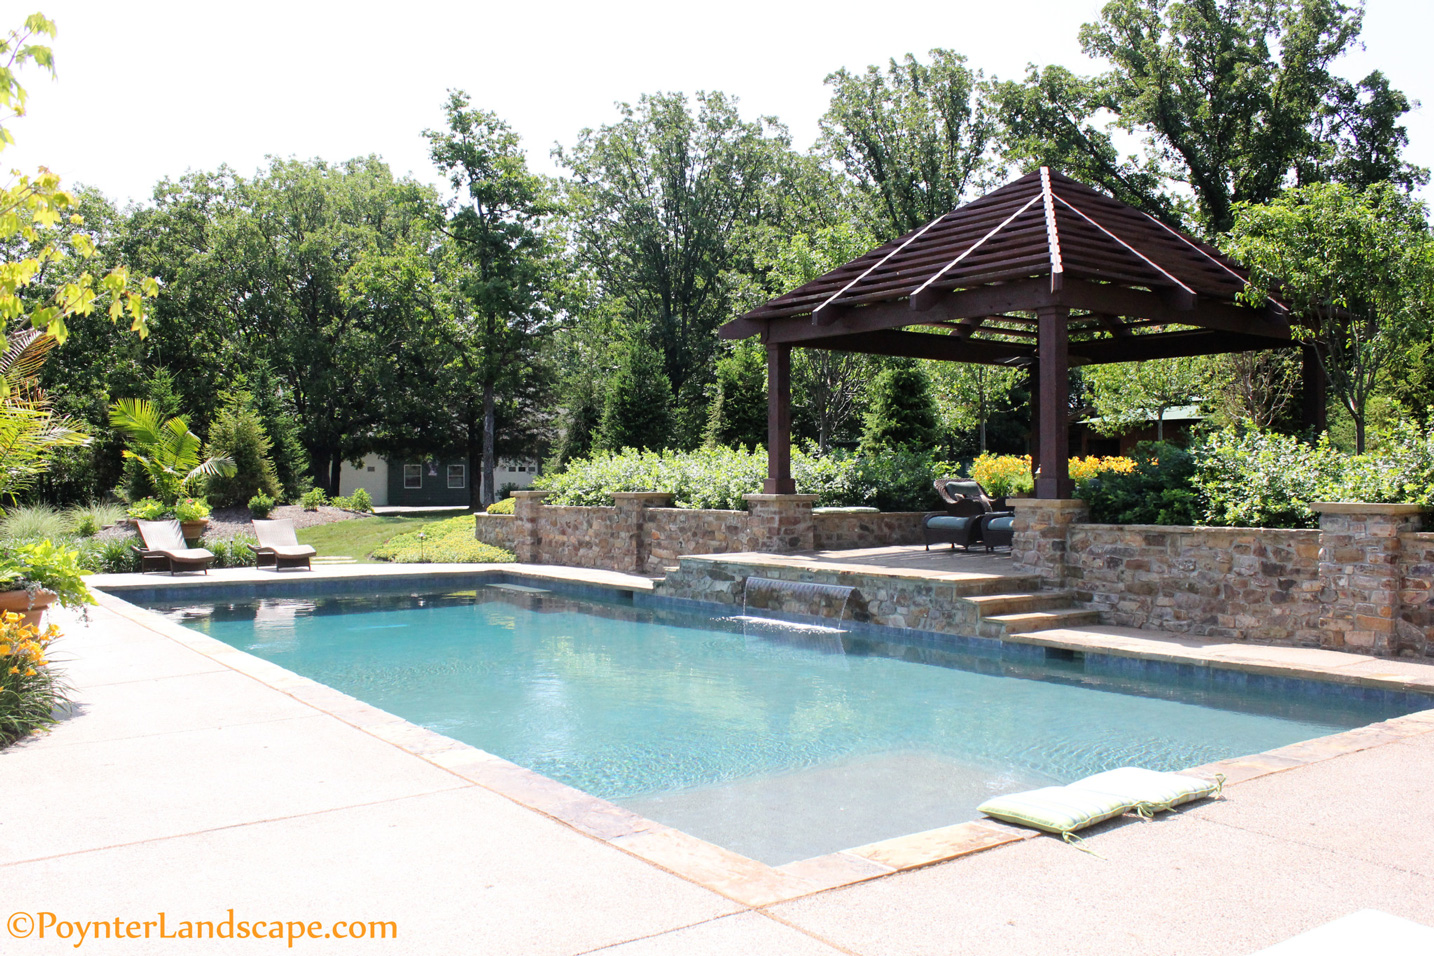 Pool Renovations in St. Louis, Missouri. Contact Poynter Landscape today for the best pool renovation ideas in St. Louis.